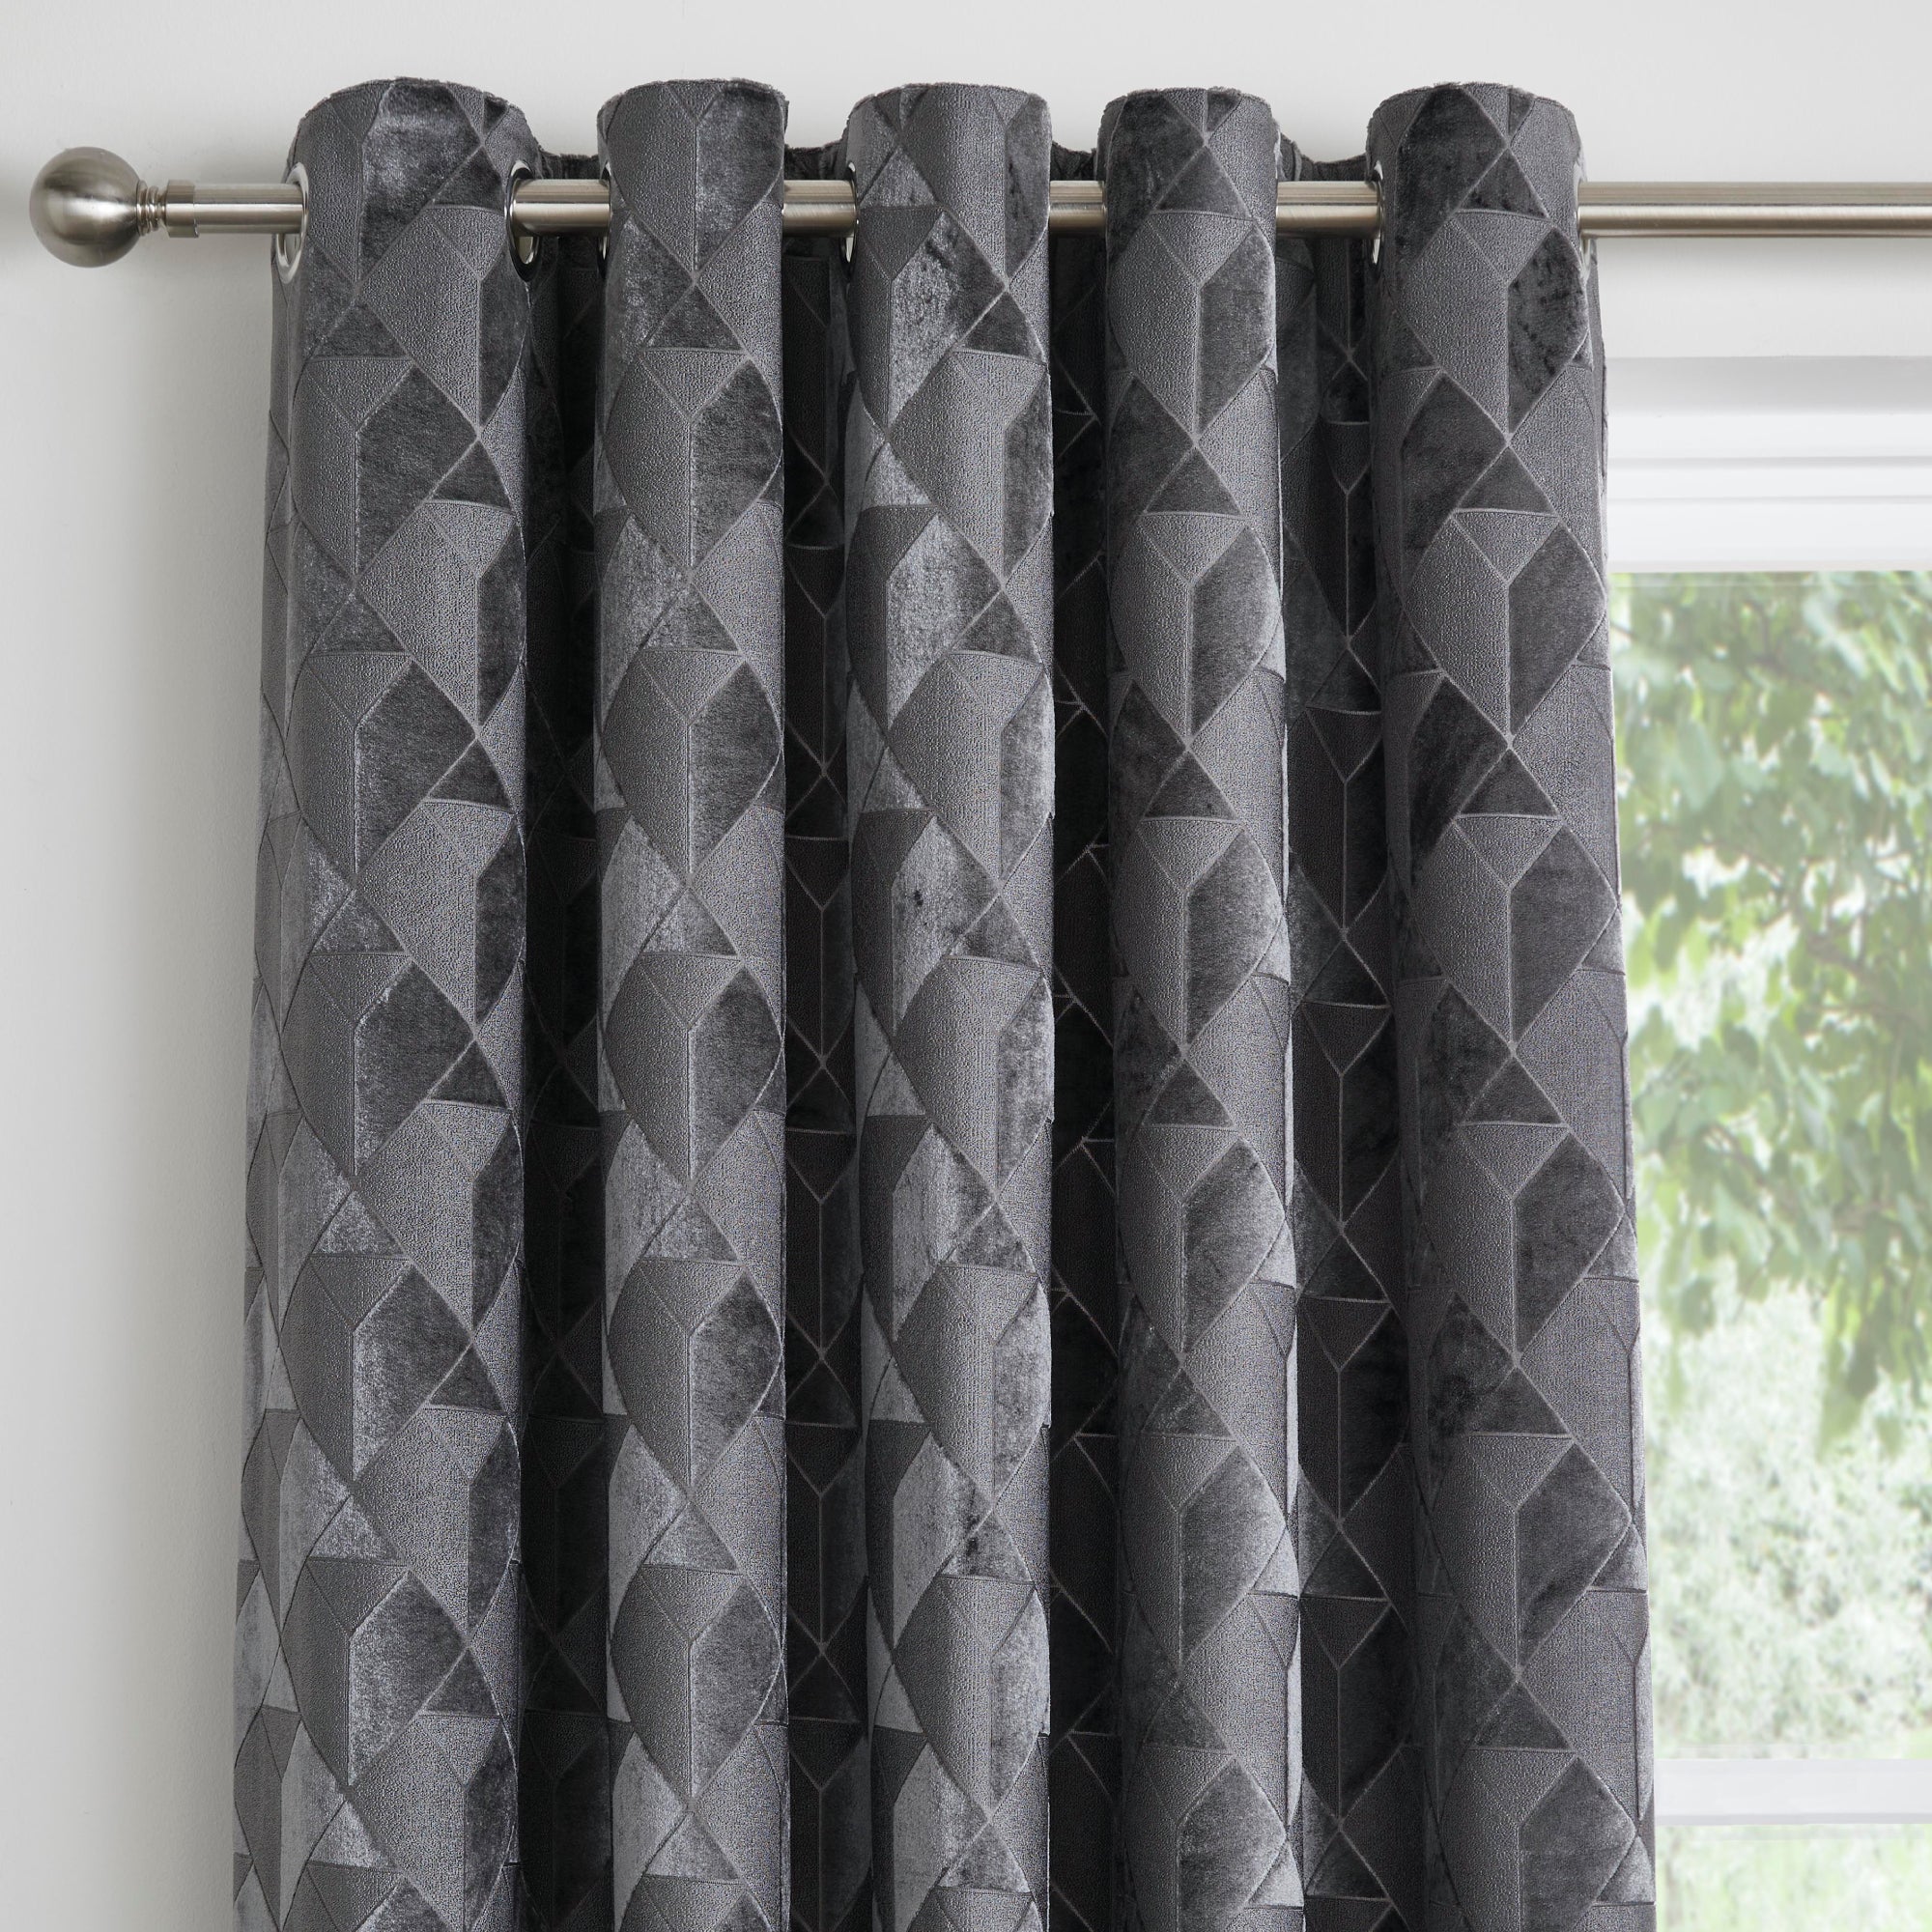 Appletree Boutique Quentin Jacquard Slate Eyelet Curtains | Dunelm